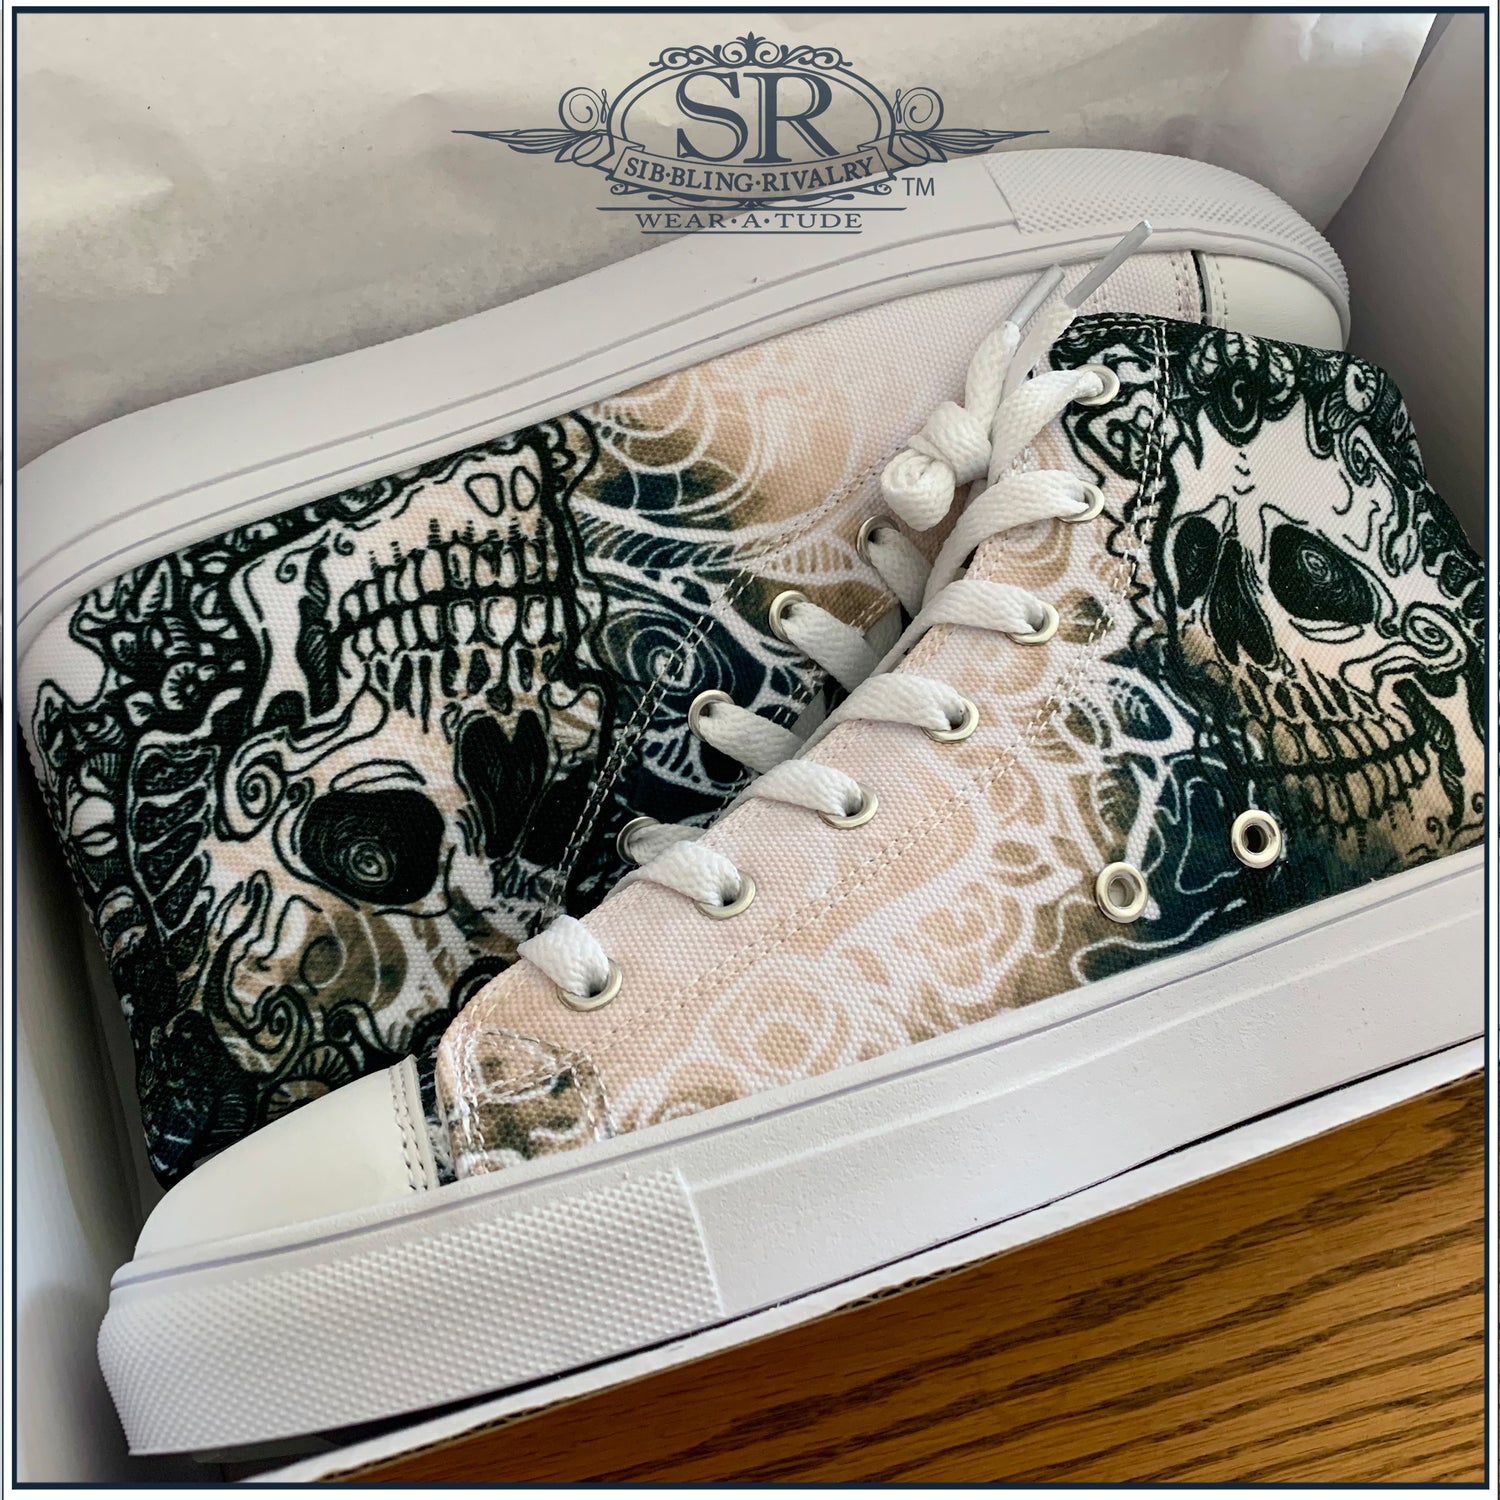 Skullatude sneakers for woman. Hightop skull design on canvas runners. Footwear with Wear Atude by SibBling Rivalry. Swirling skull with badass feel. A new skater shoe.